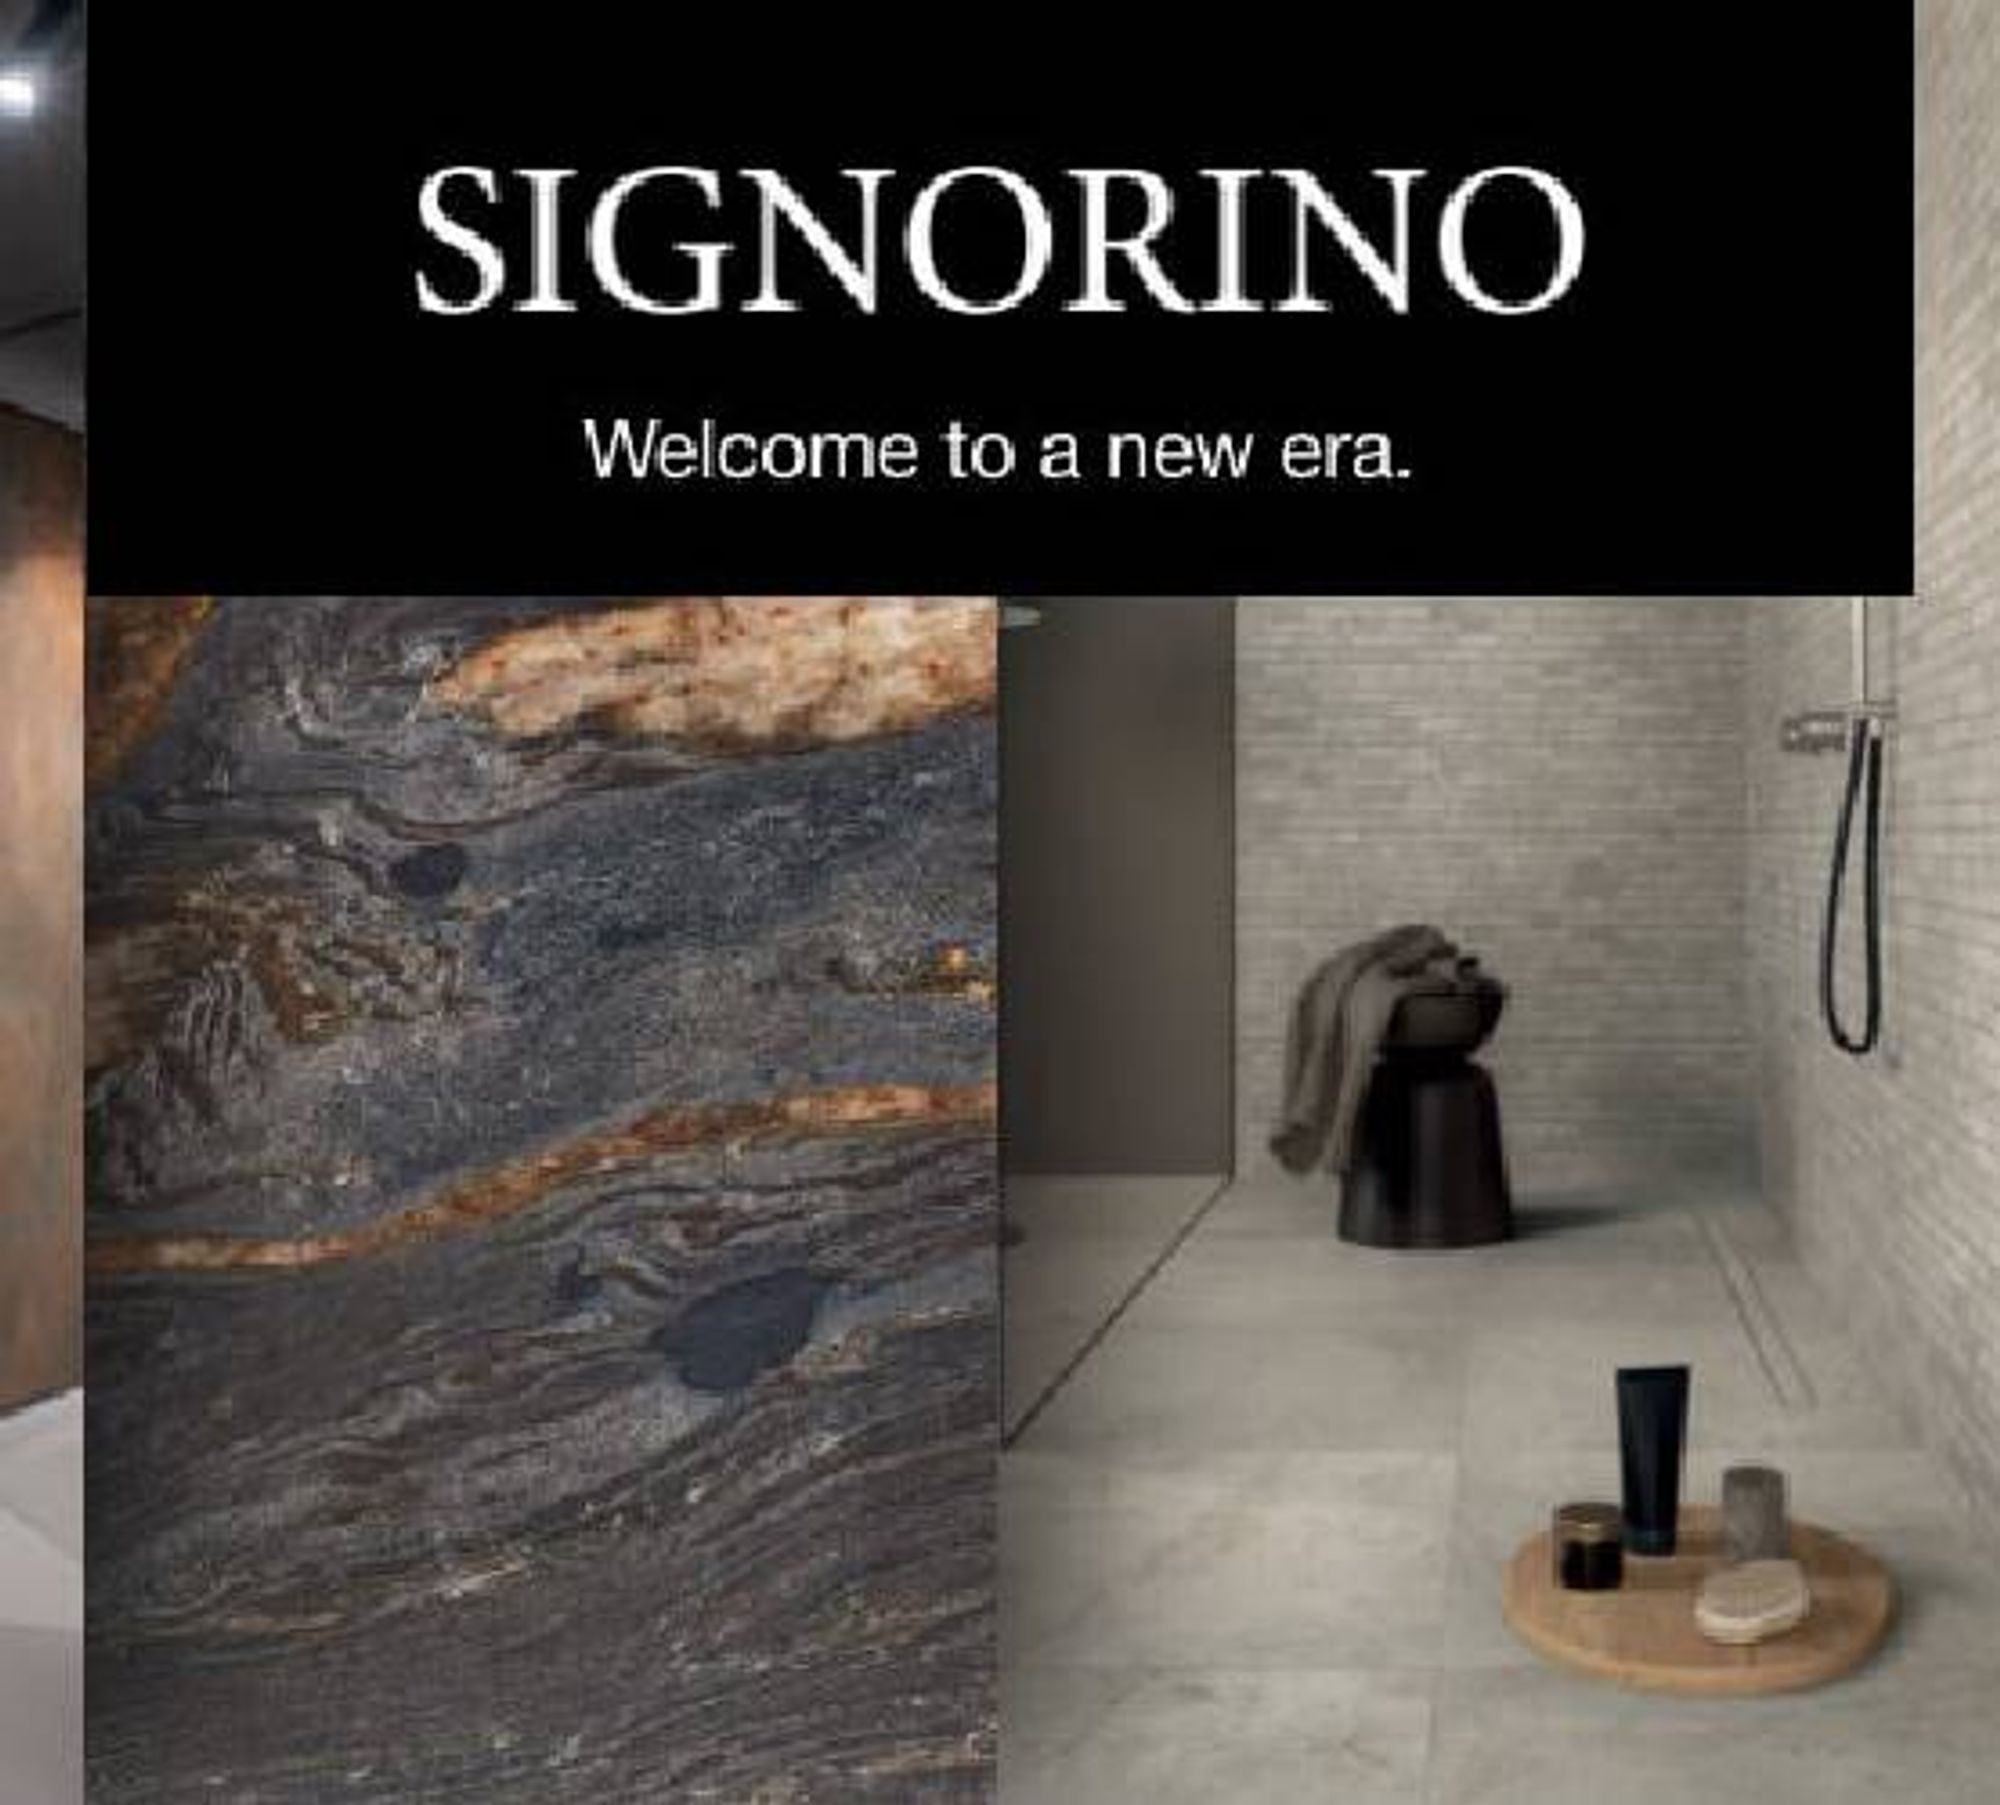 A new era for Signorino in the New Normal